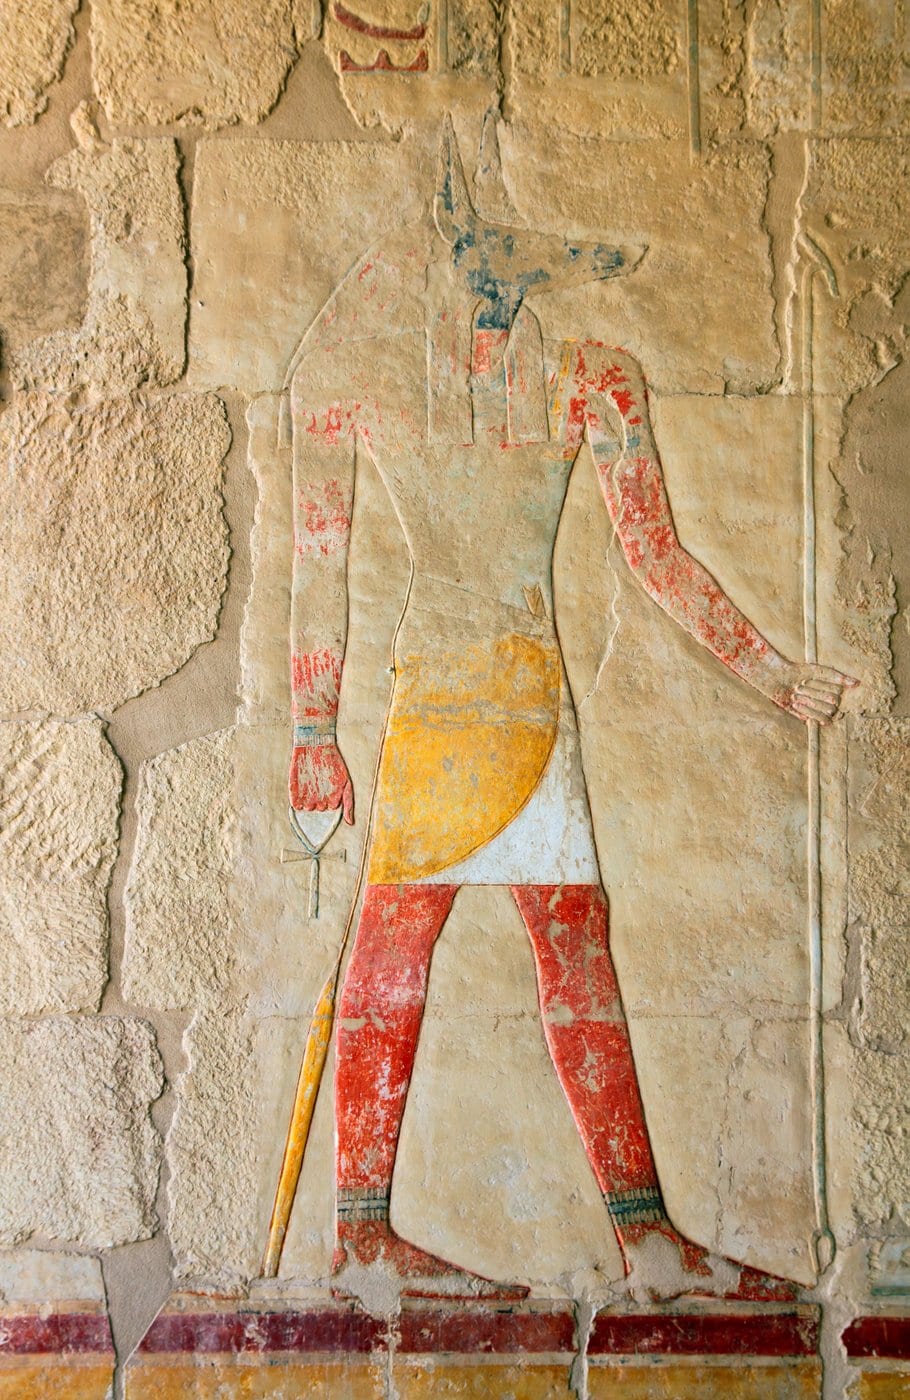 Ancient image of the Egyptian god Anubis carved into a wall in Luxor